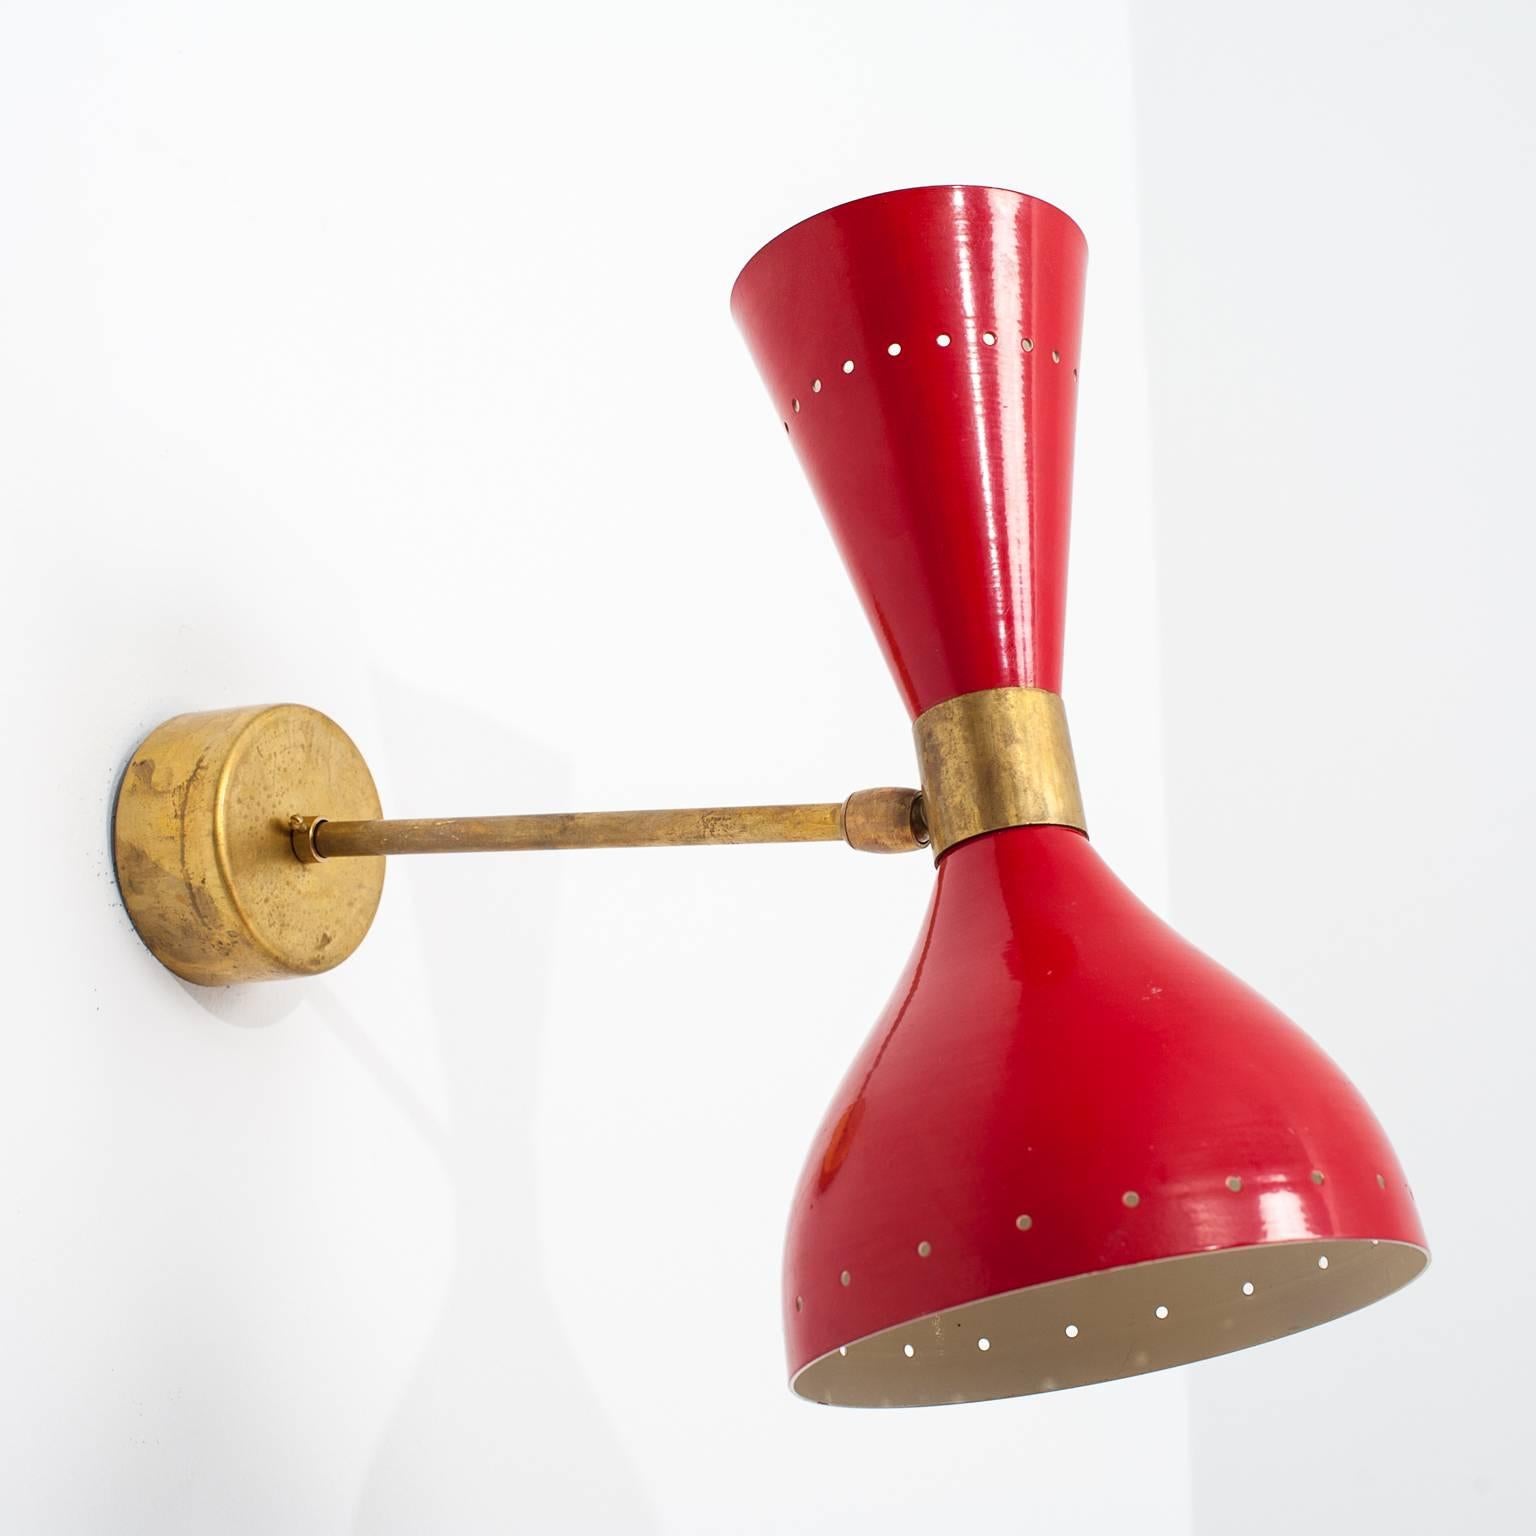 Vintage Italian sconces, Stilnovo Diabolo style, adjustable and rotatable. Lacquered in red, light in both direction, up and down, good condition and patina.